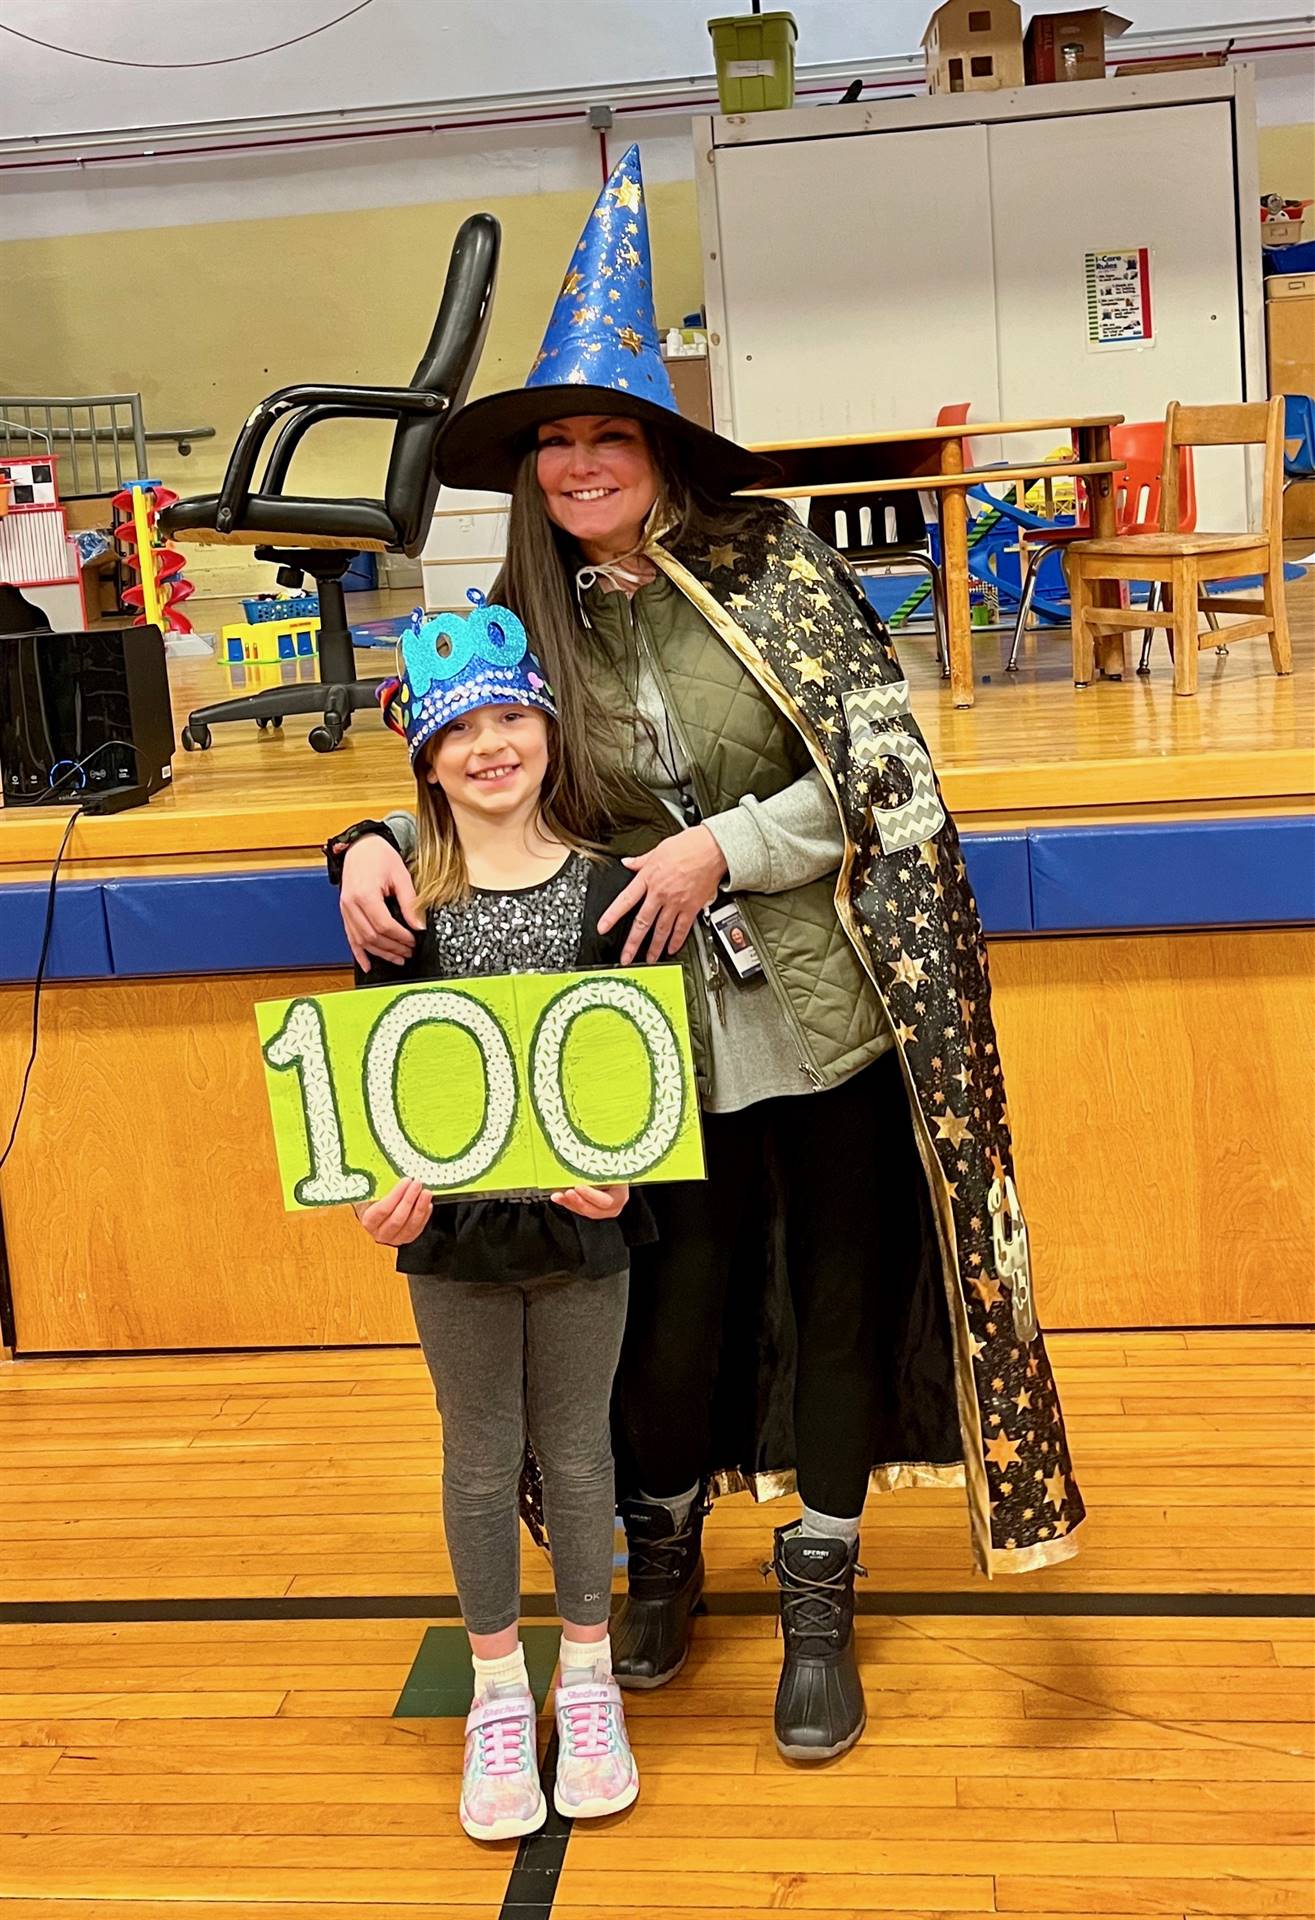 A wizard and student holding 100 sign